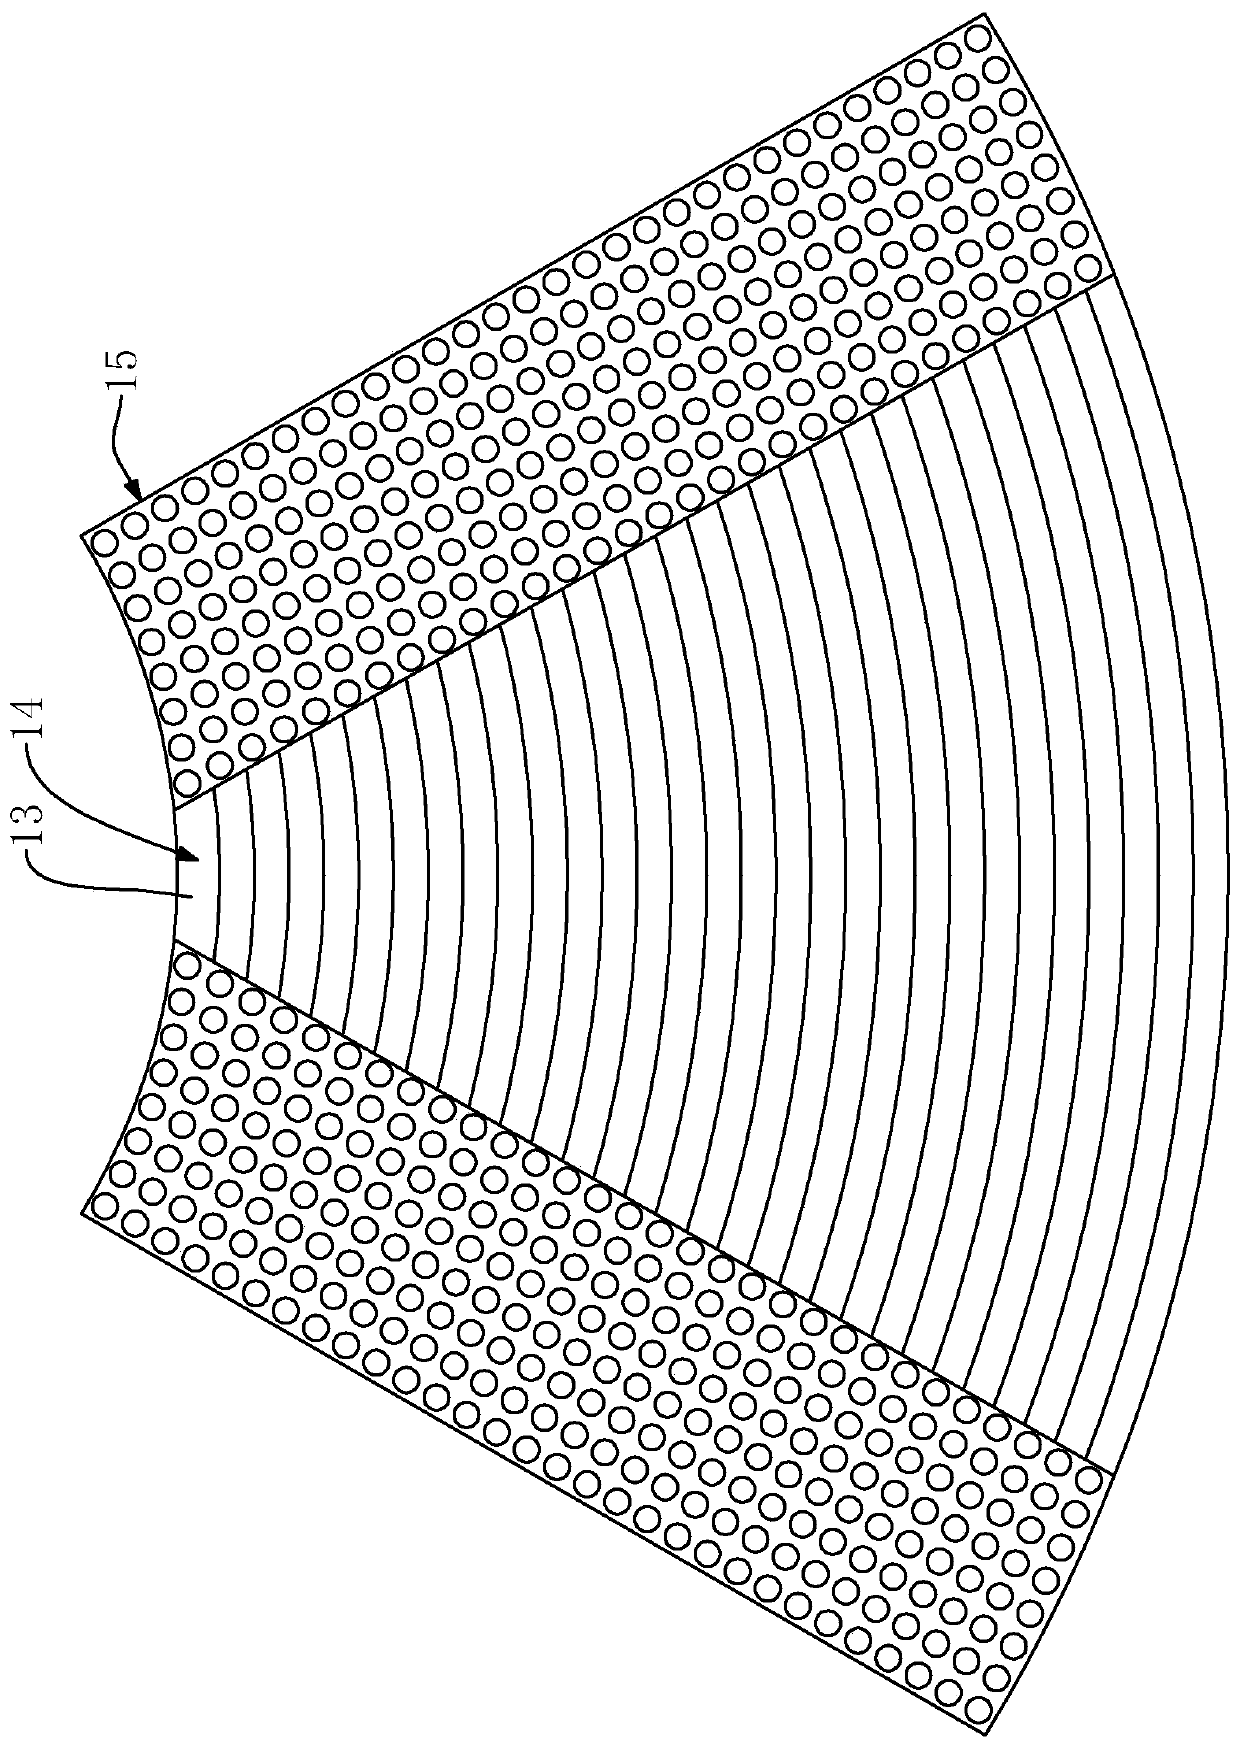 Forming device for space bending pipe